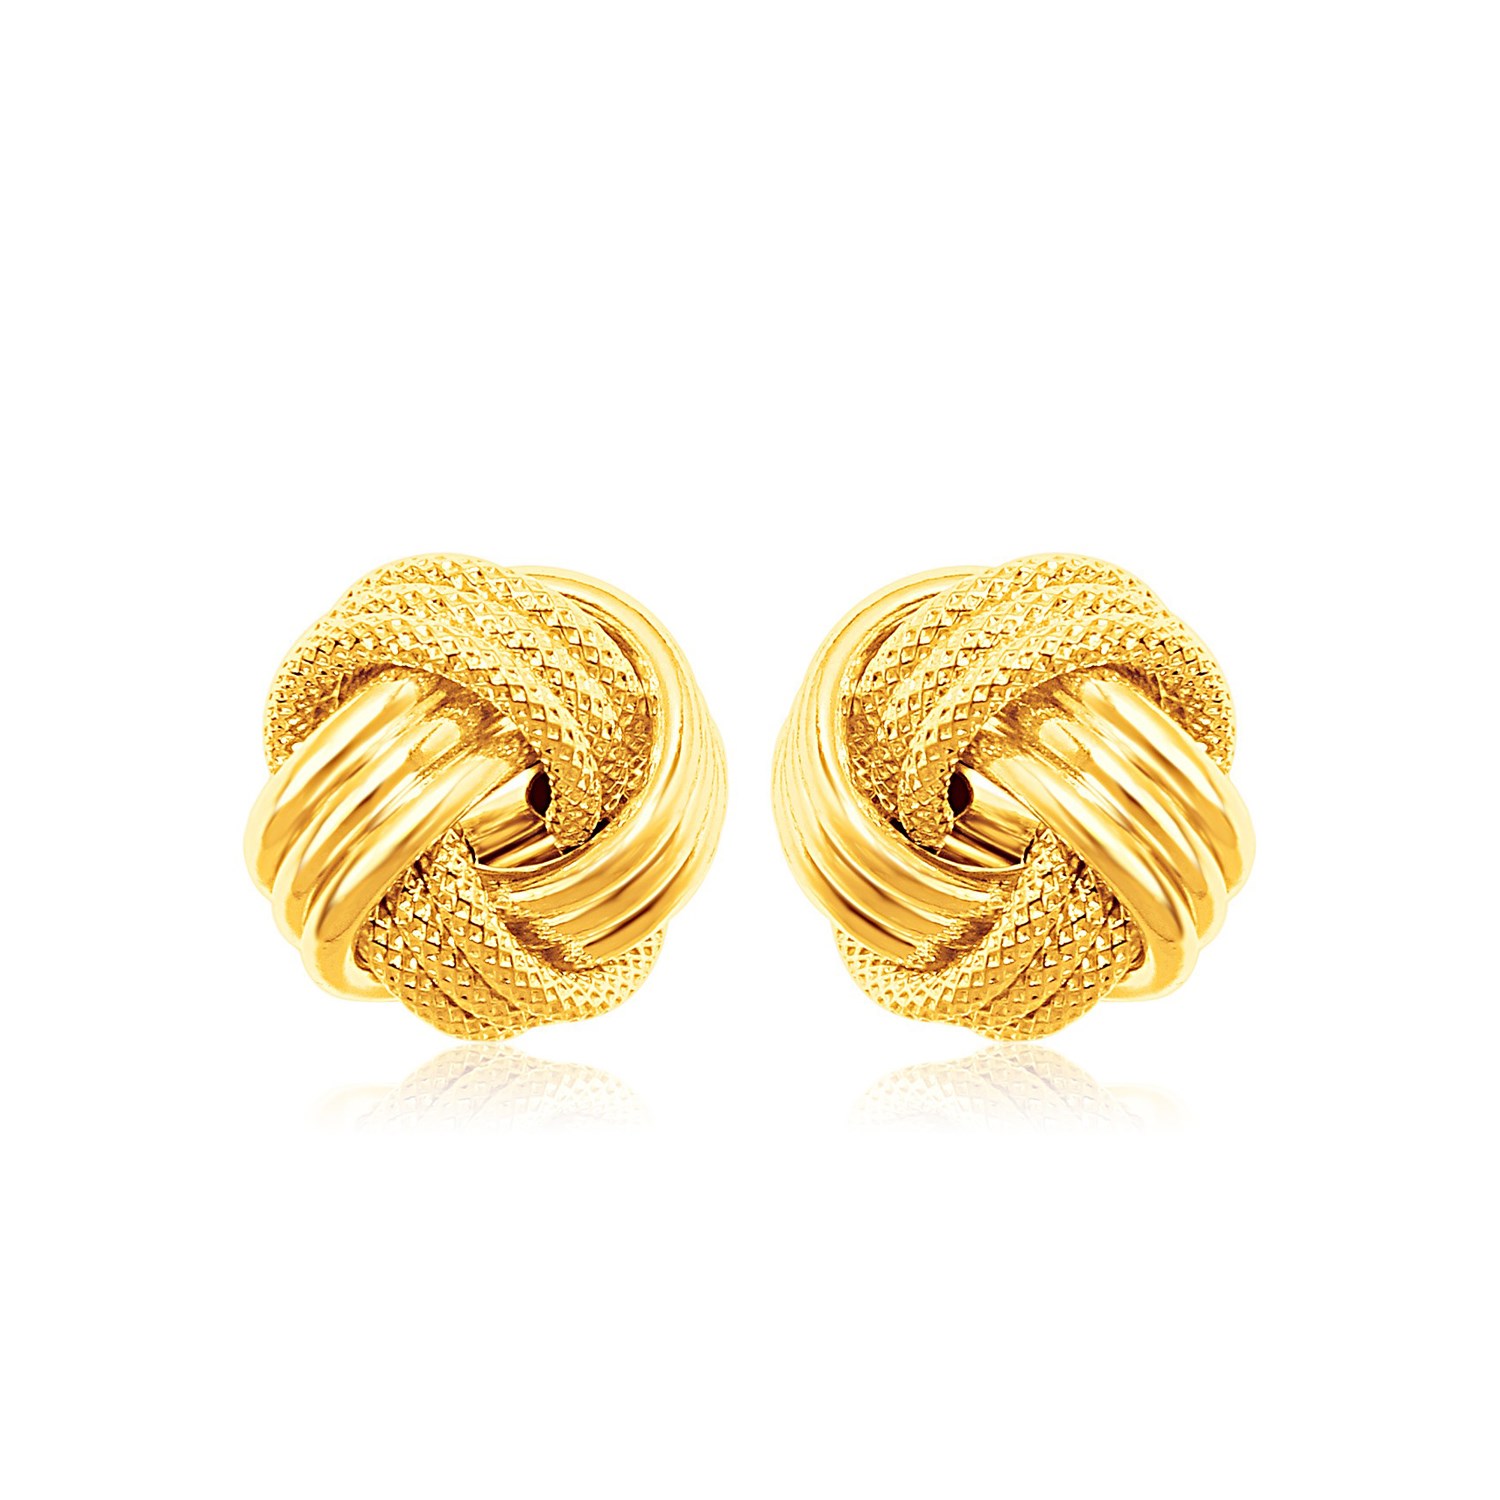 Small Ridged Love Knot Earring in 14k Yellow Gold - Richard Cannon Jewelry